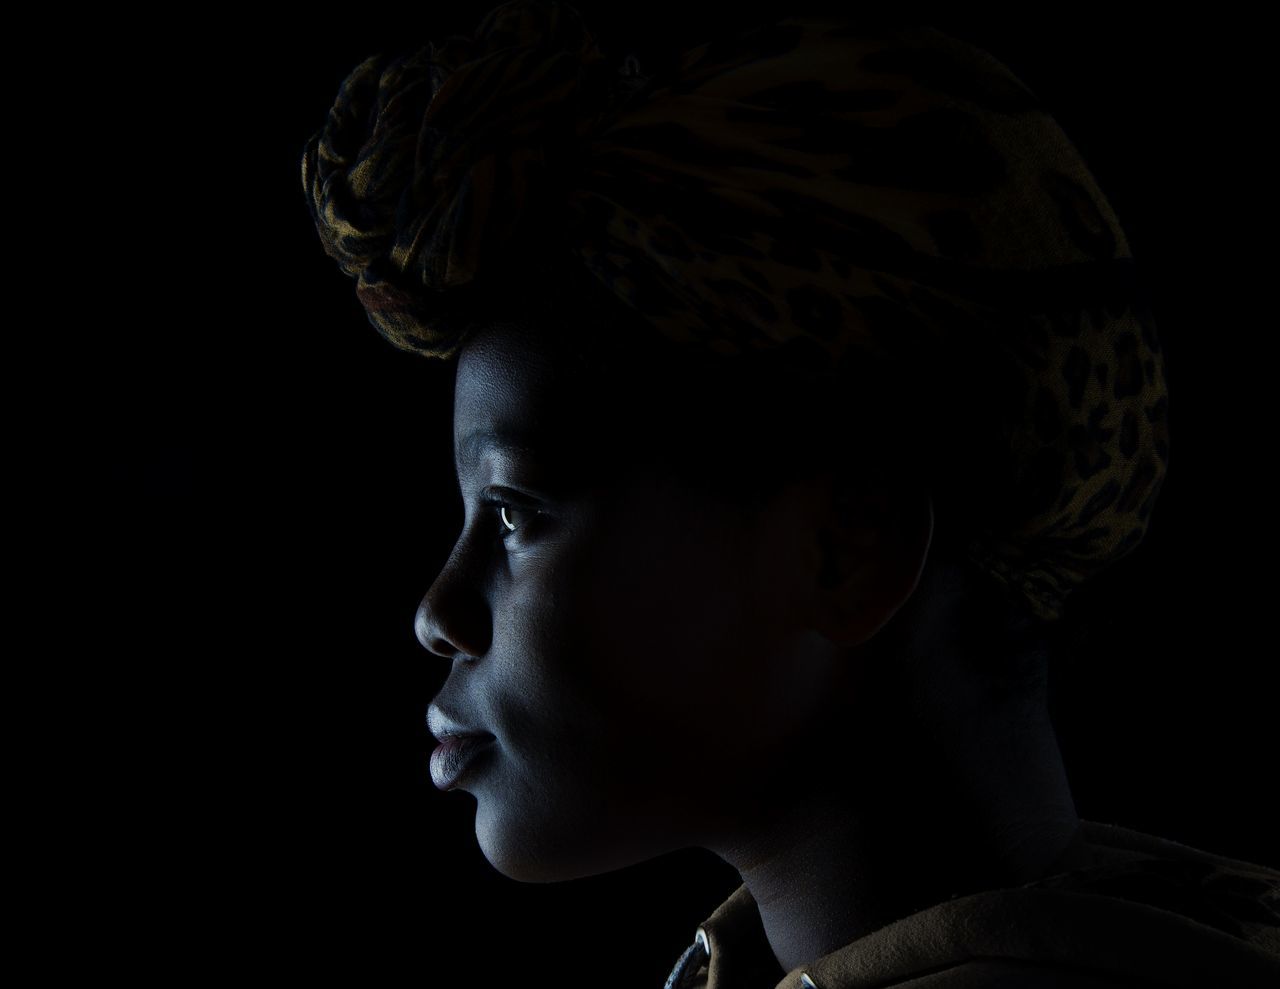 headshot, studio shot, portrait, one person, close-up, indoors, black background, looking, looking away, lifestyles, side view, contemplation, real people, cut out, young adult, child, serious, profile view, human face, dark, teenager